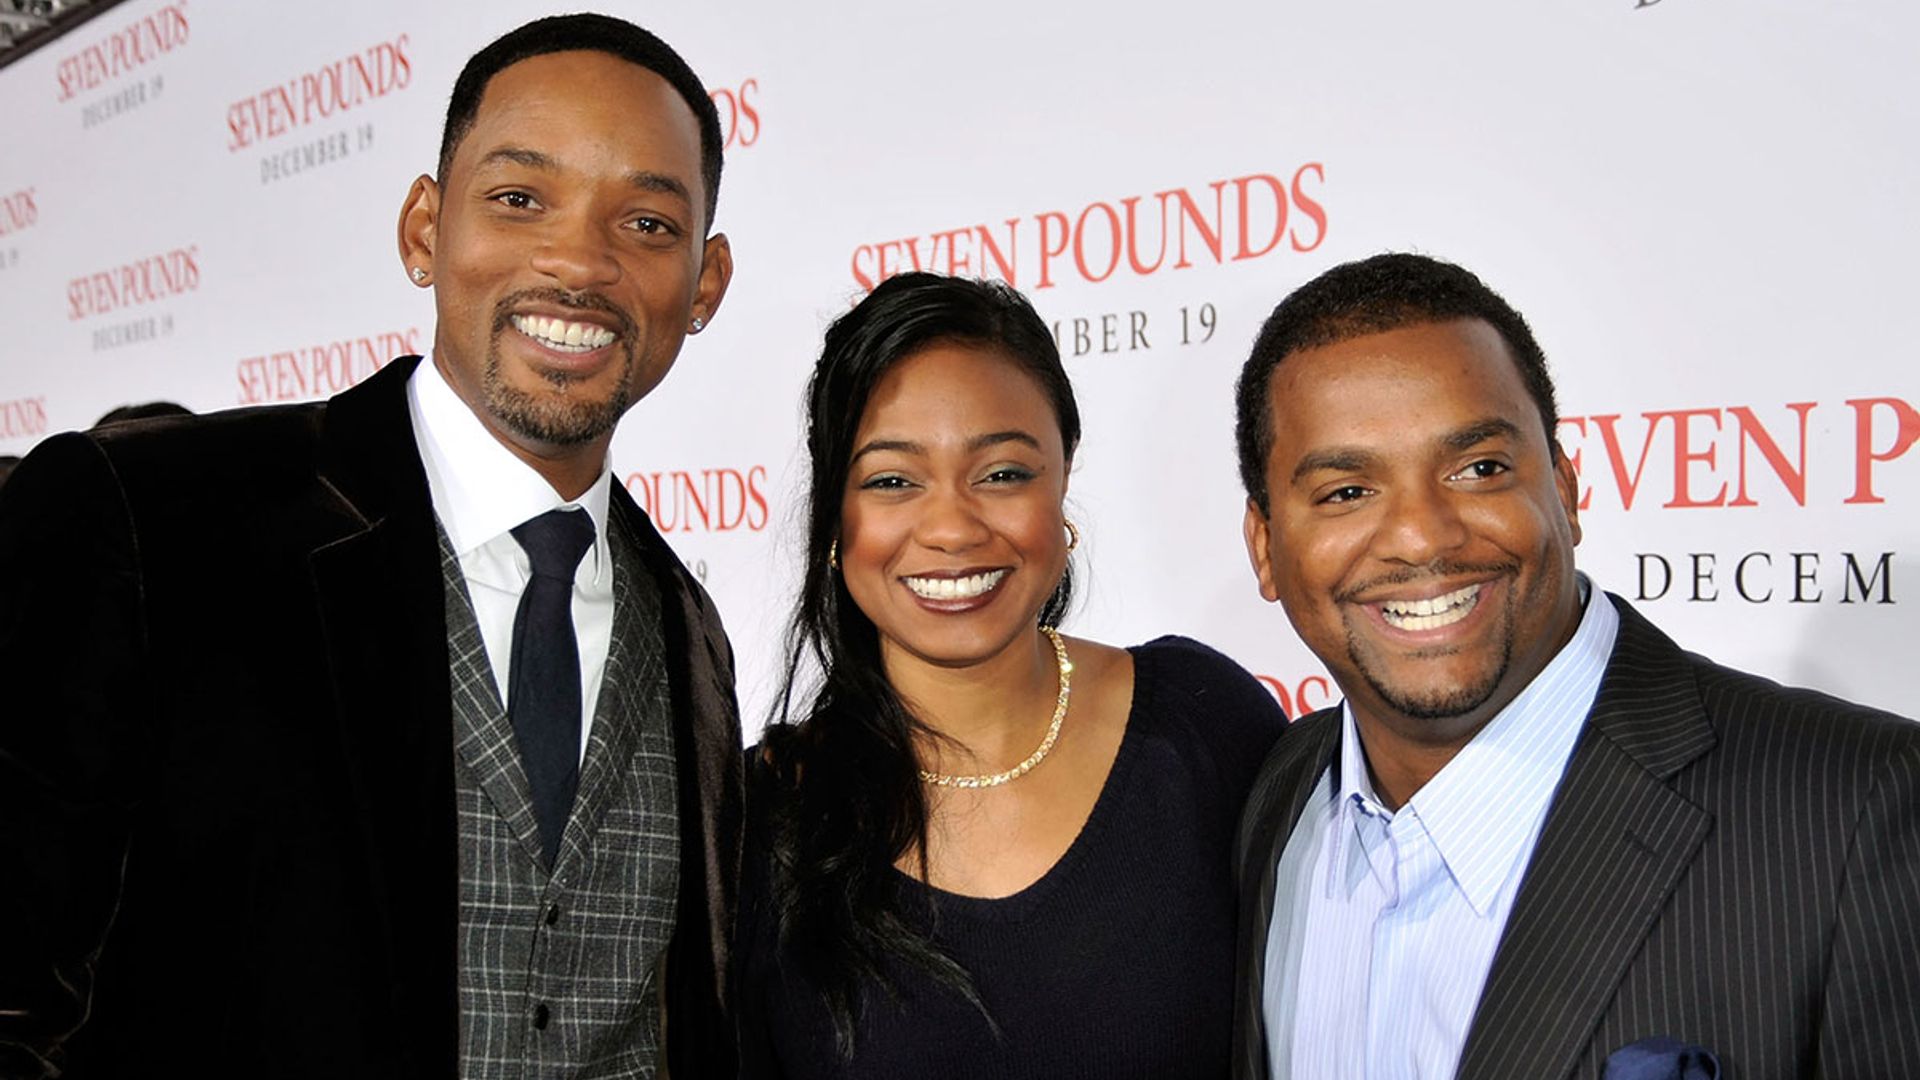 Will Smith's The Fresh Prince of Bel-Air co-star Tatyana Ali breaks silence – 'I believe in him'